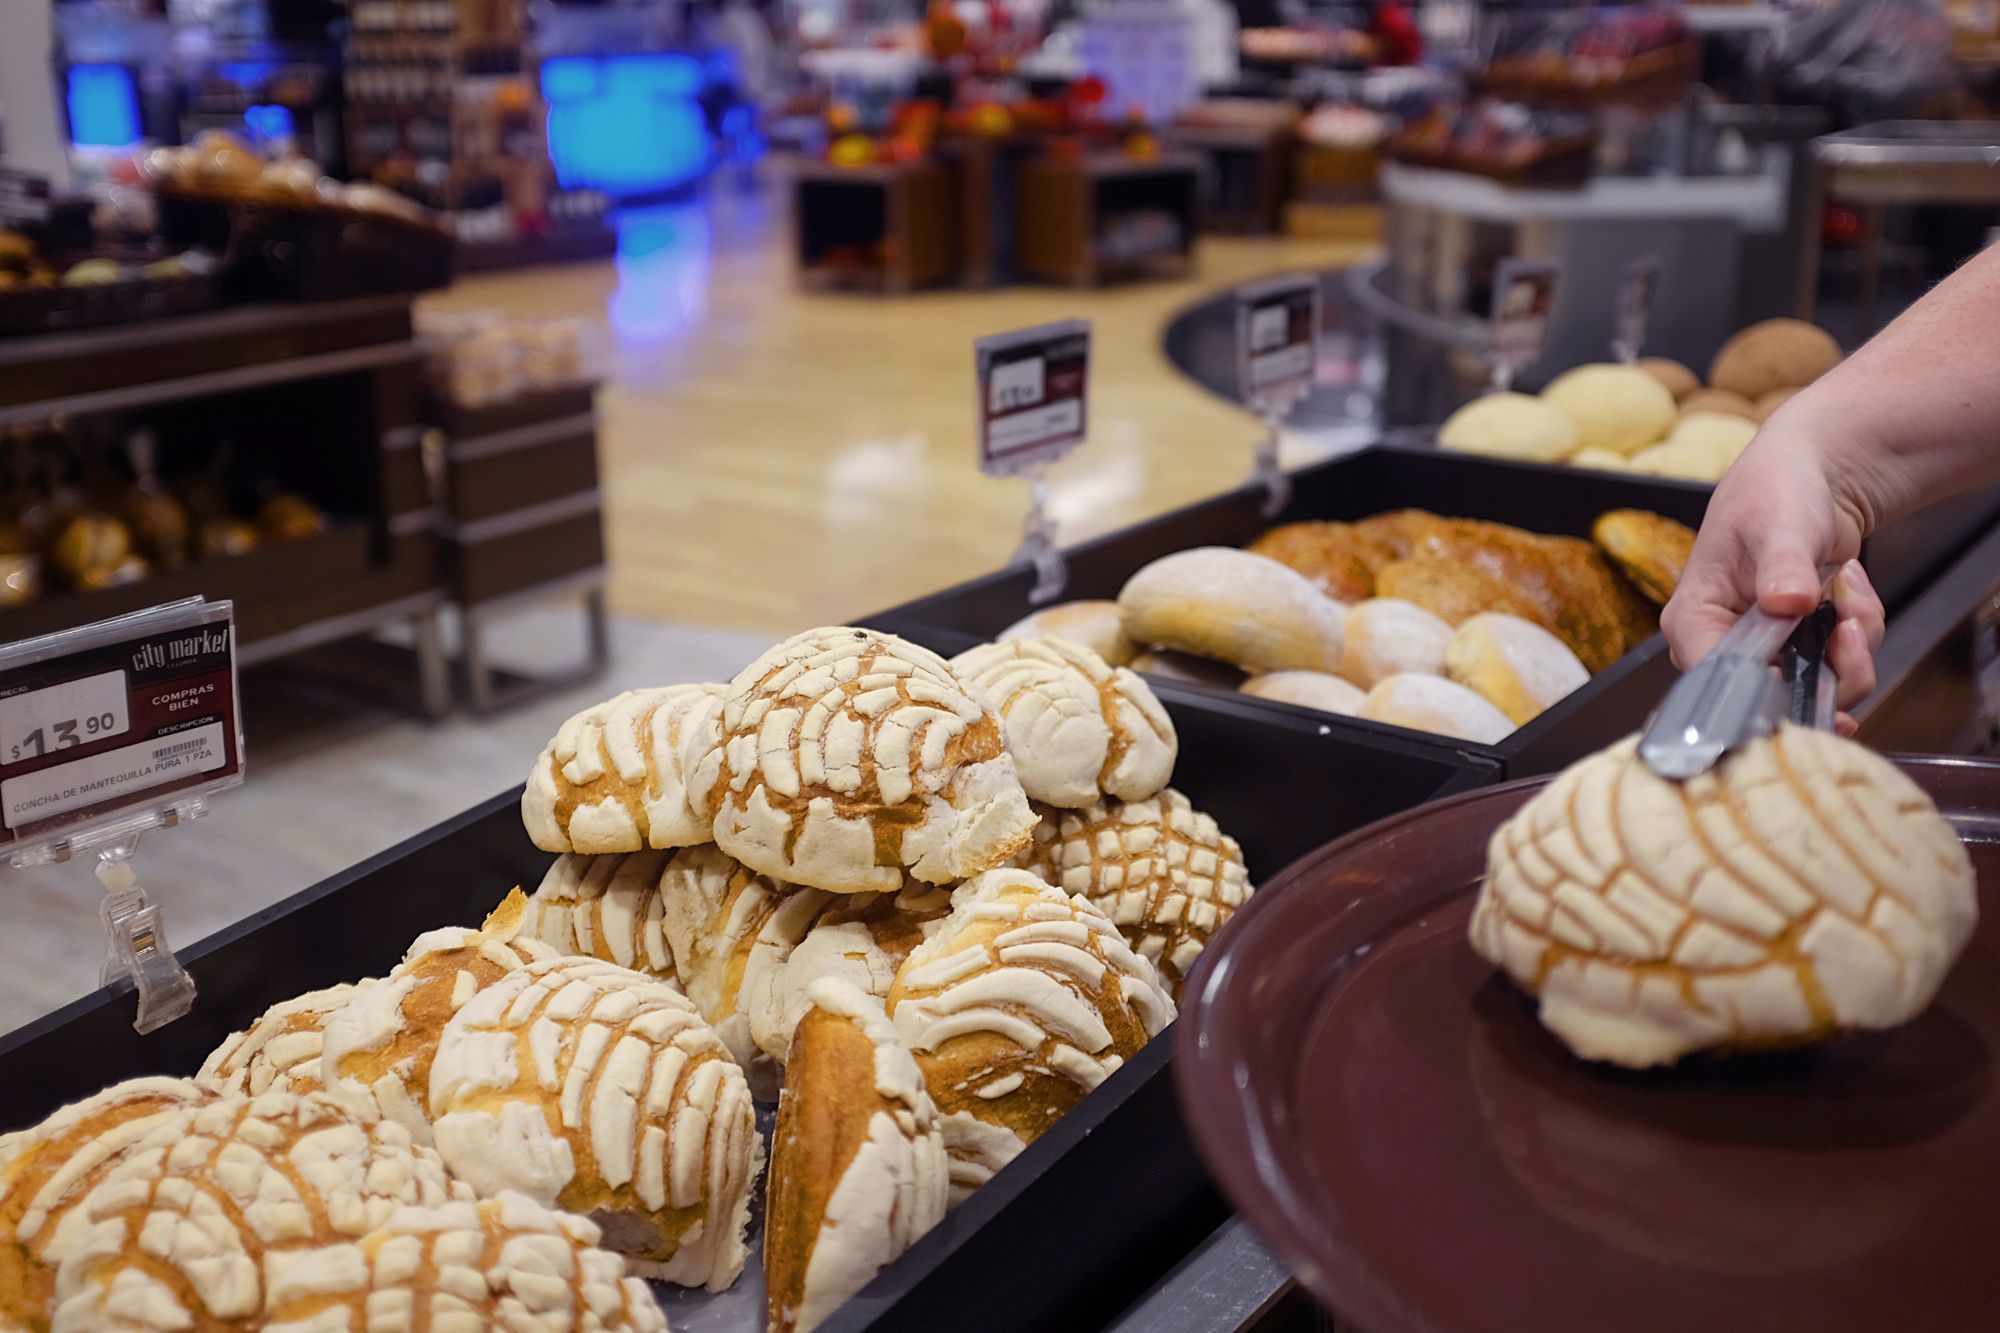 Conchas at a grocery store